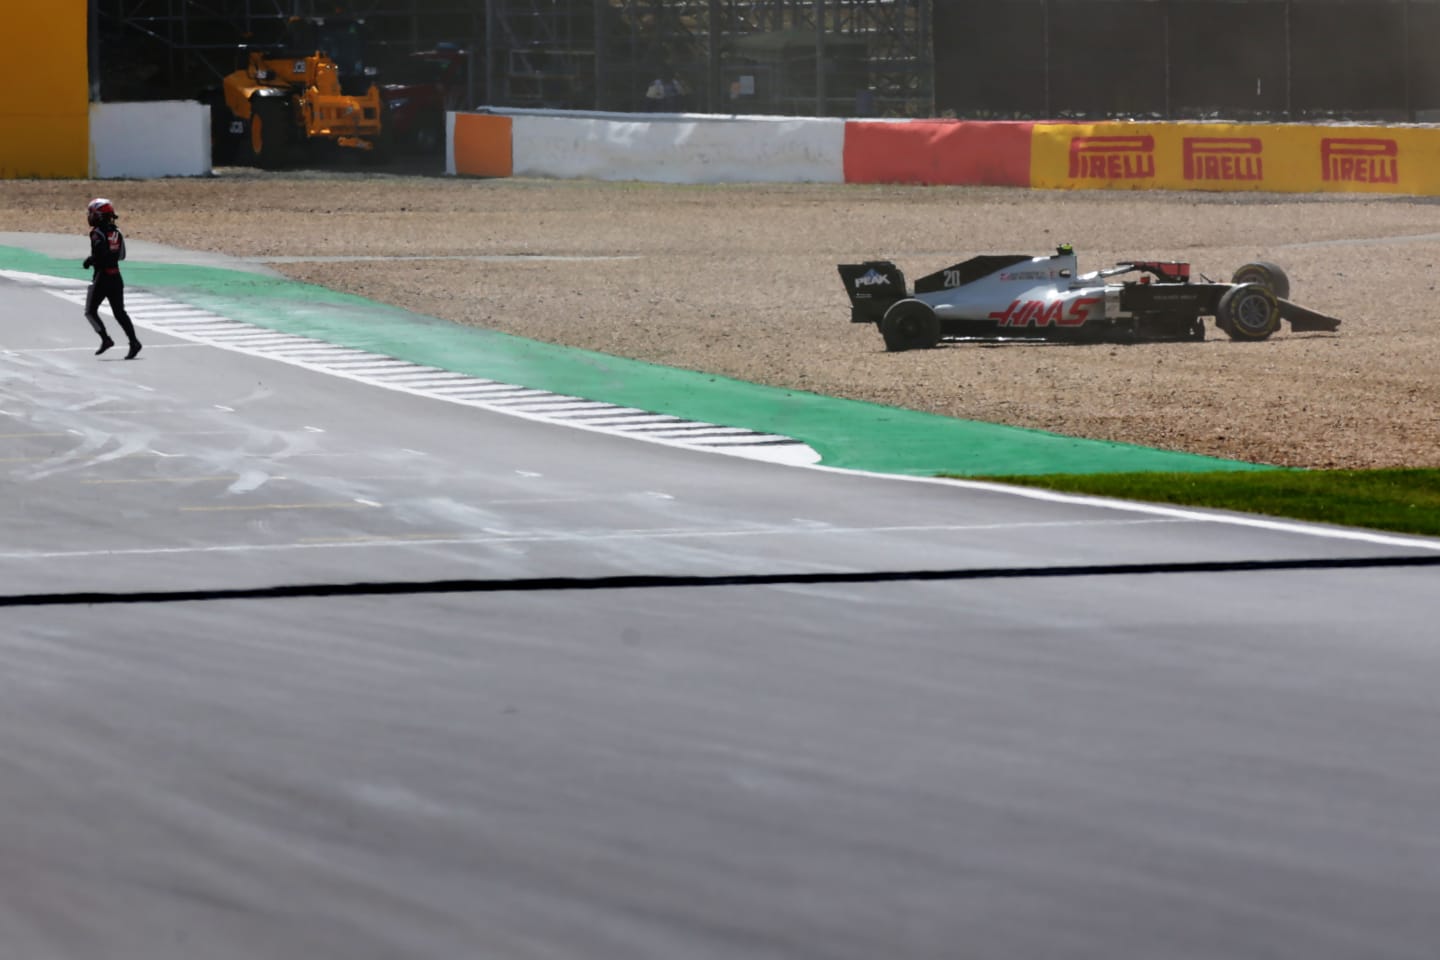 NORTHAMPTON, ENGLAND - AUGUST 02:Kevin Magnussen of Denmark and Haas F1 runs from his car after spinning off during the F1 Grand Prix of Great Britain at Silverstone on August 02, 2020 in Northampton, England. (Photo by Peter Fox/Getty Images)